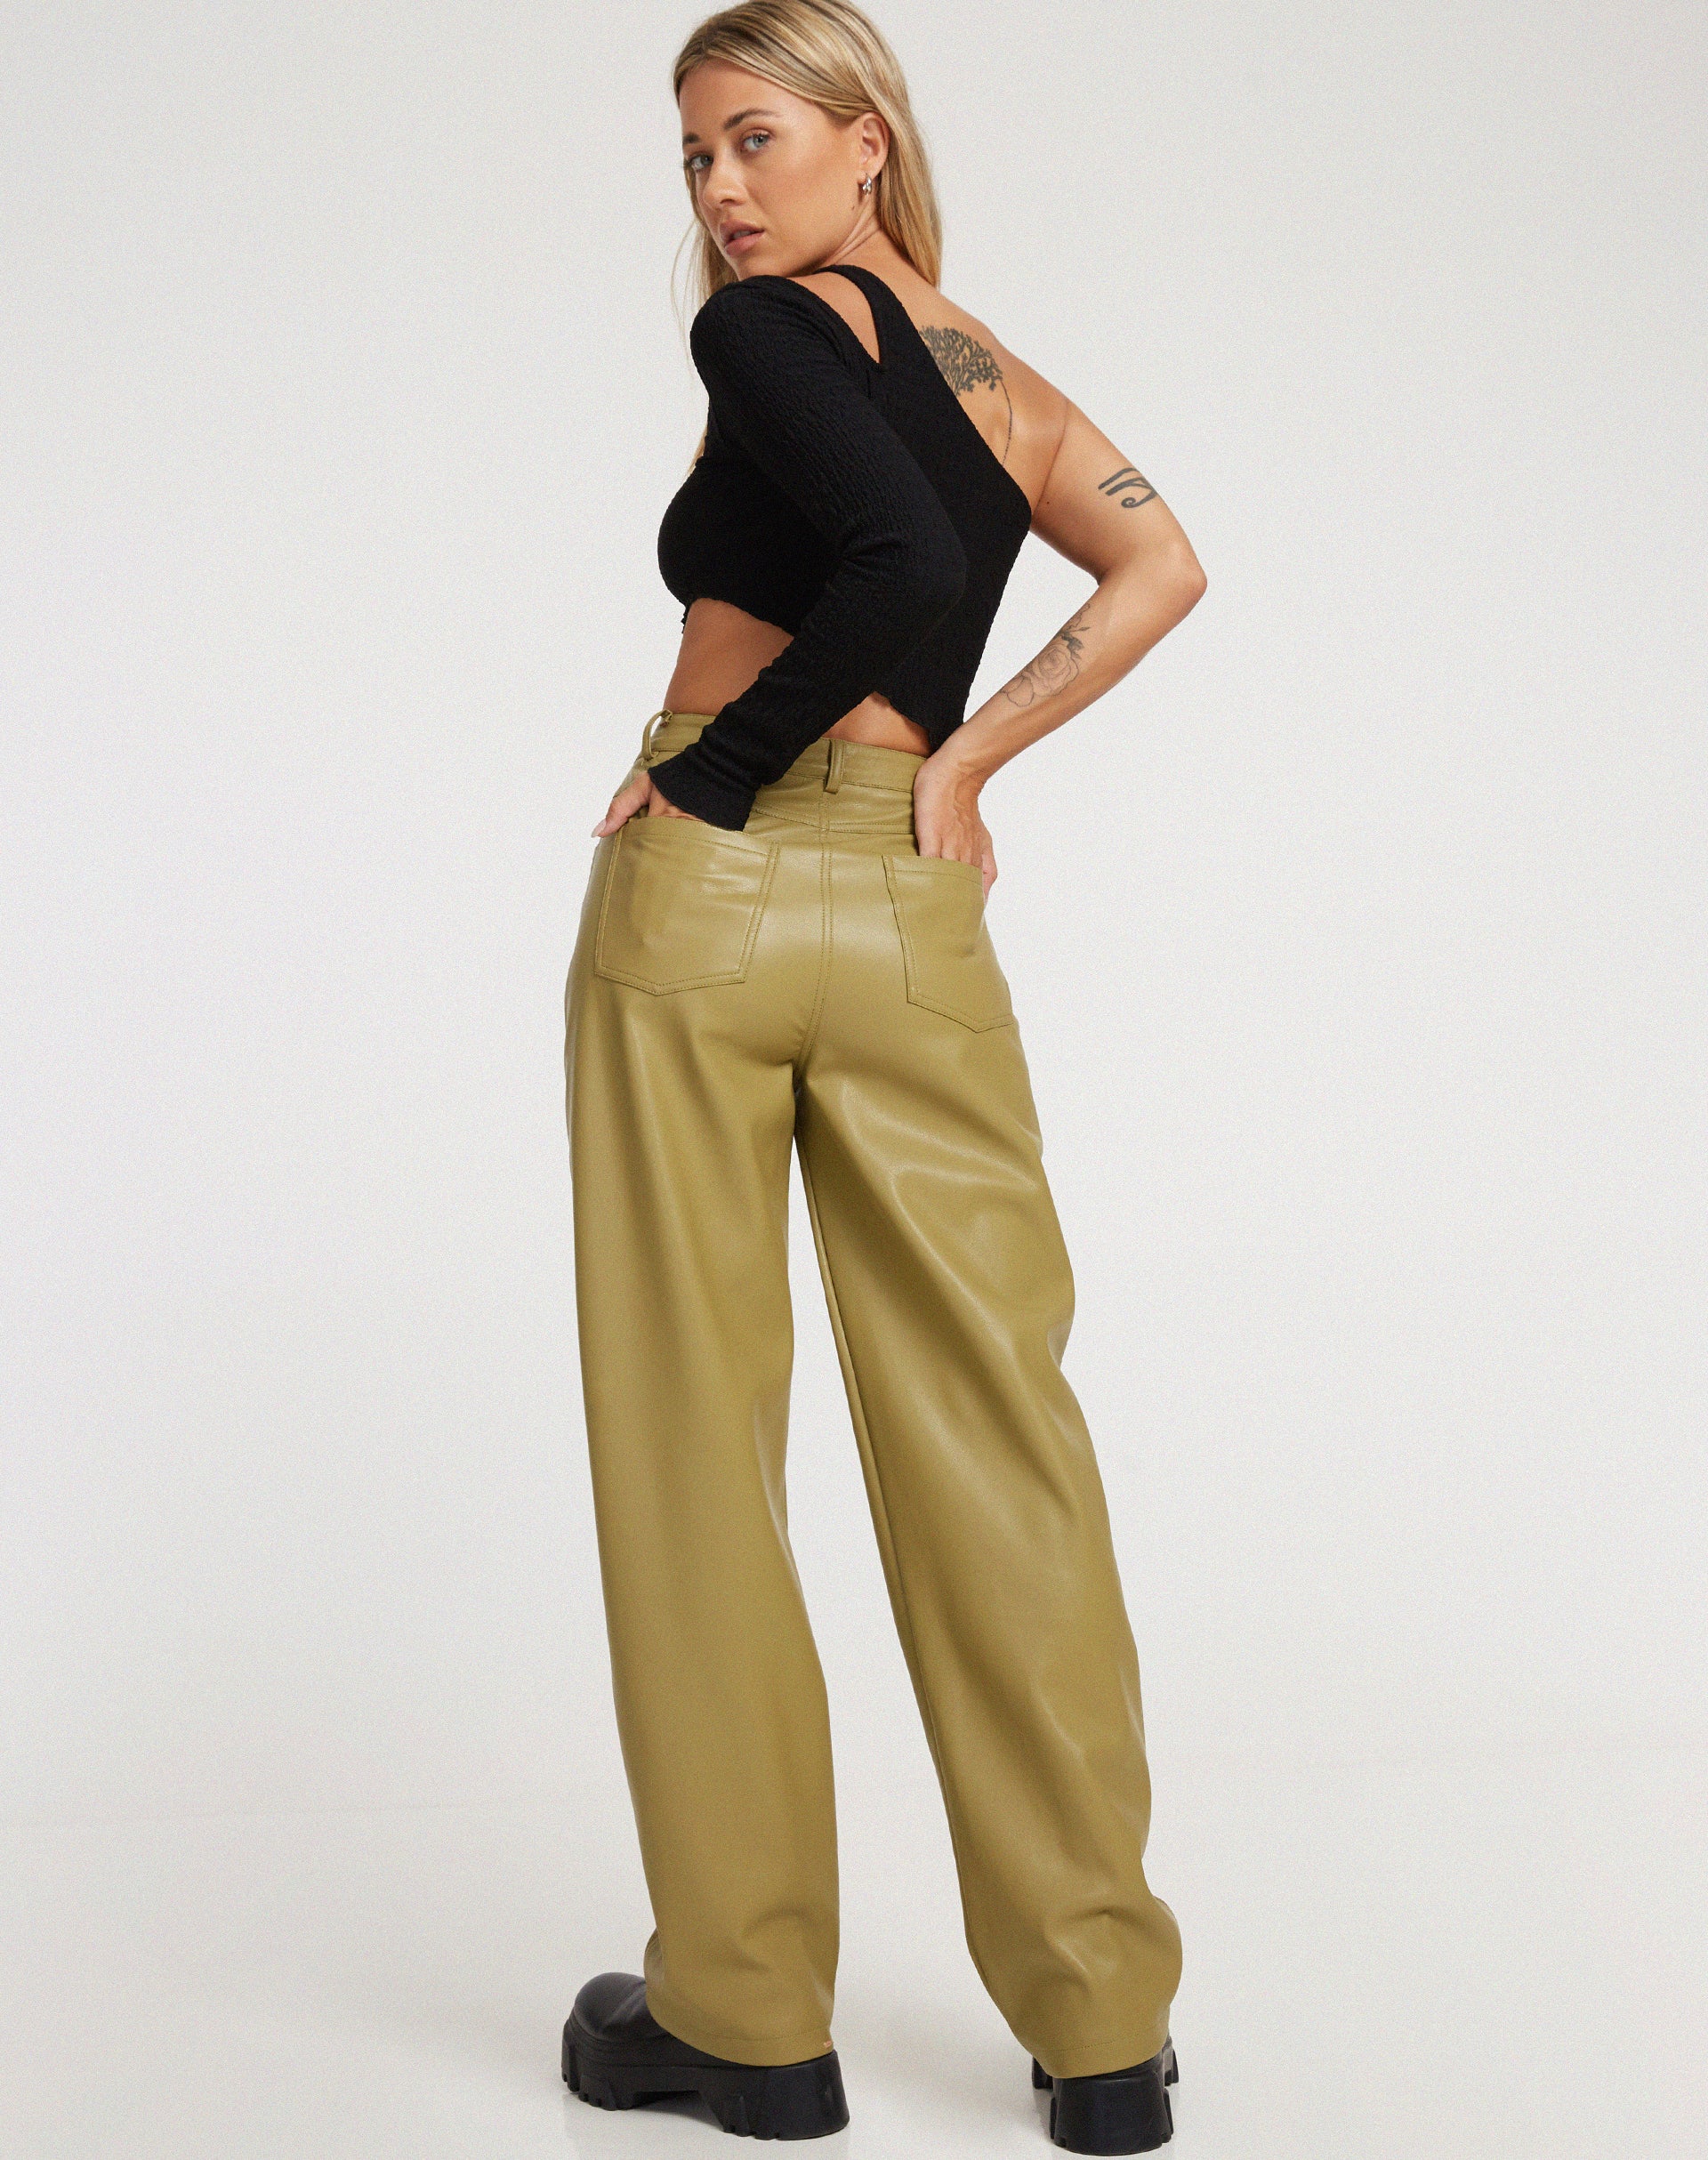 image of Parallel Trouser in PU Leaf Green